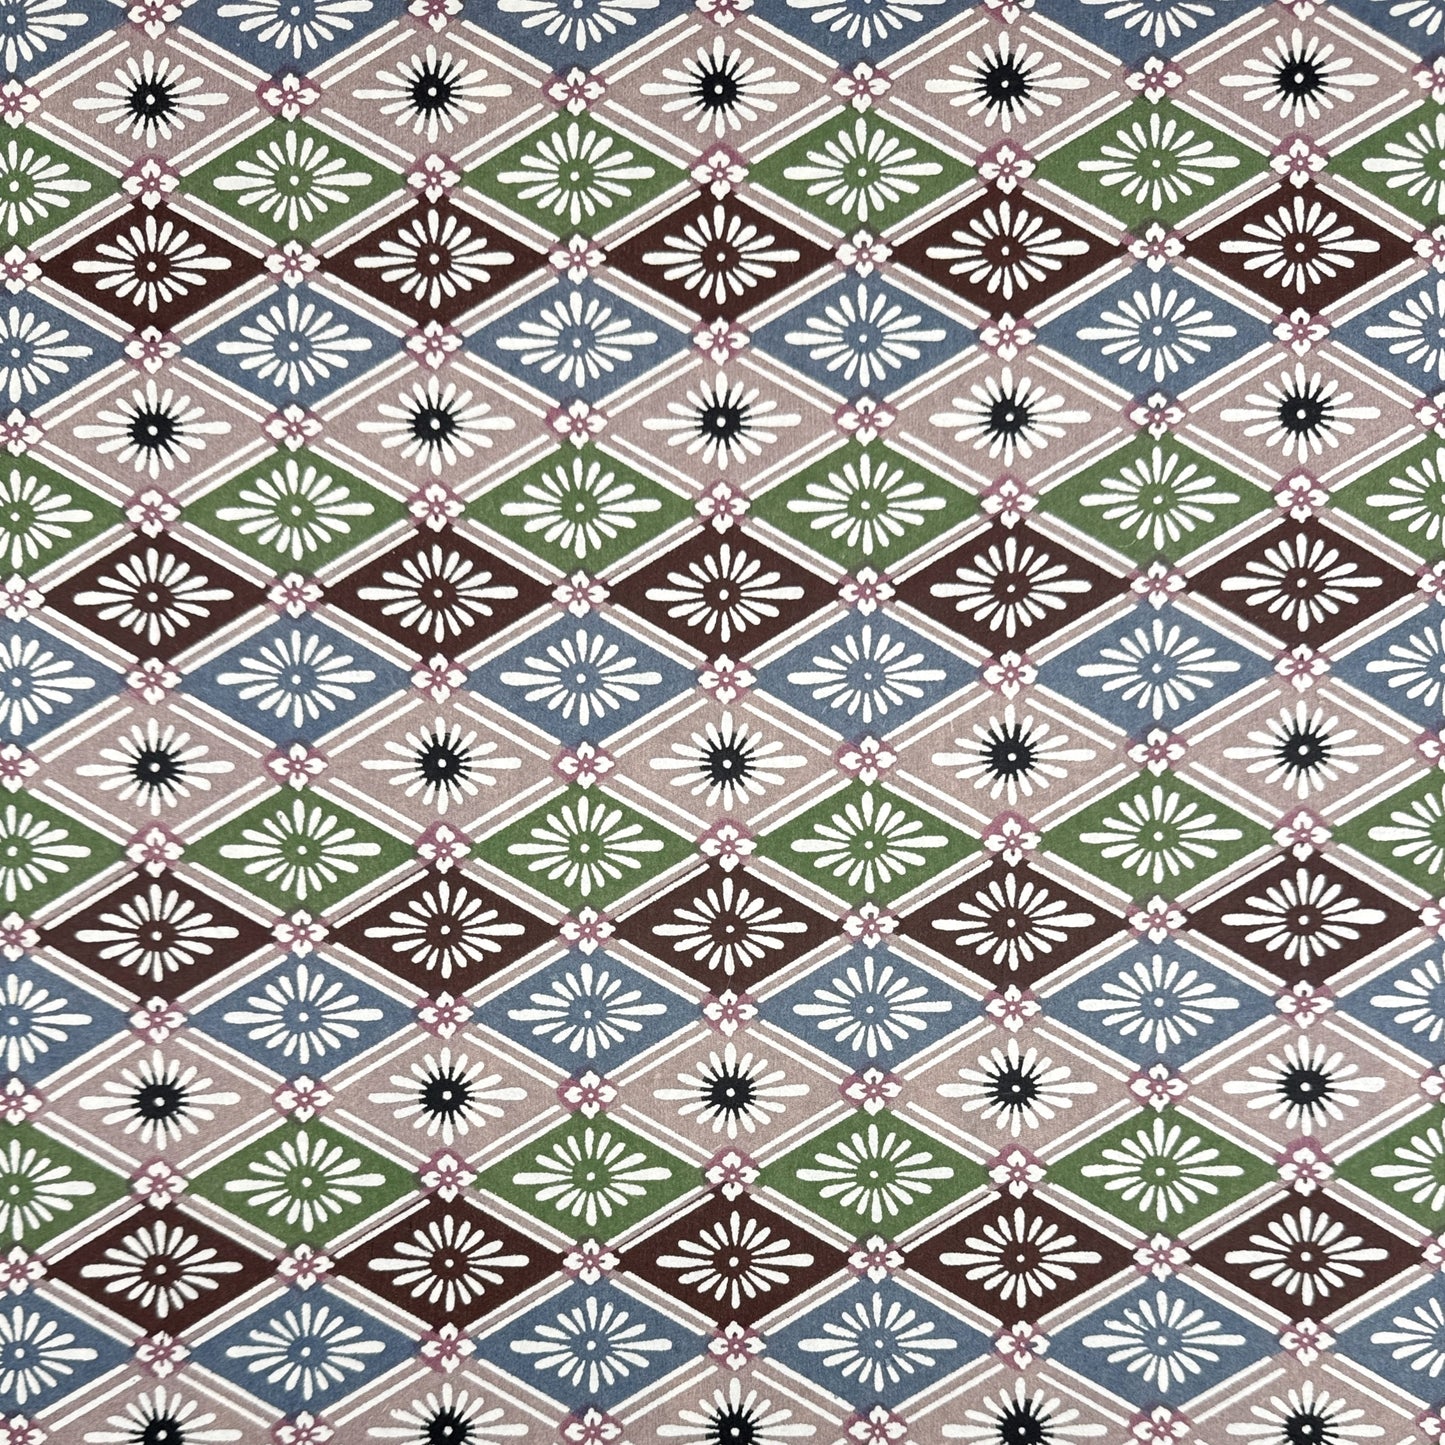 A Japanese stencil-dyed patterned paper with a repeat diamond floral pattern in blue, taupe, green and brown.